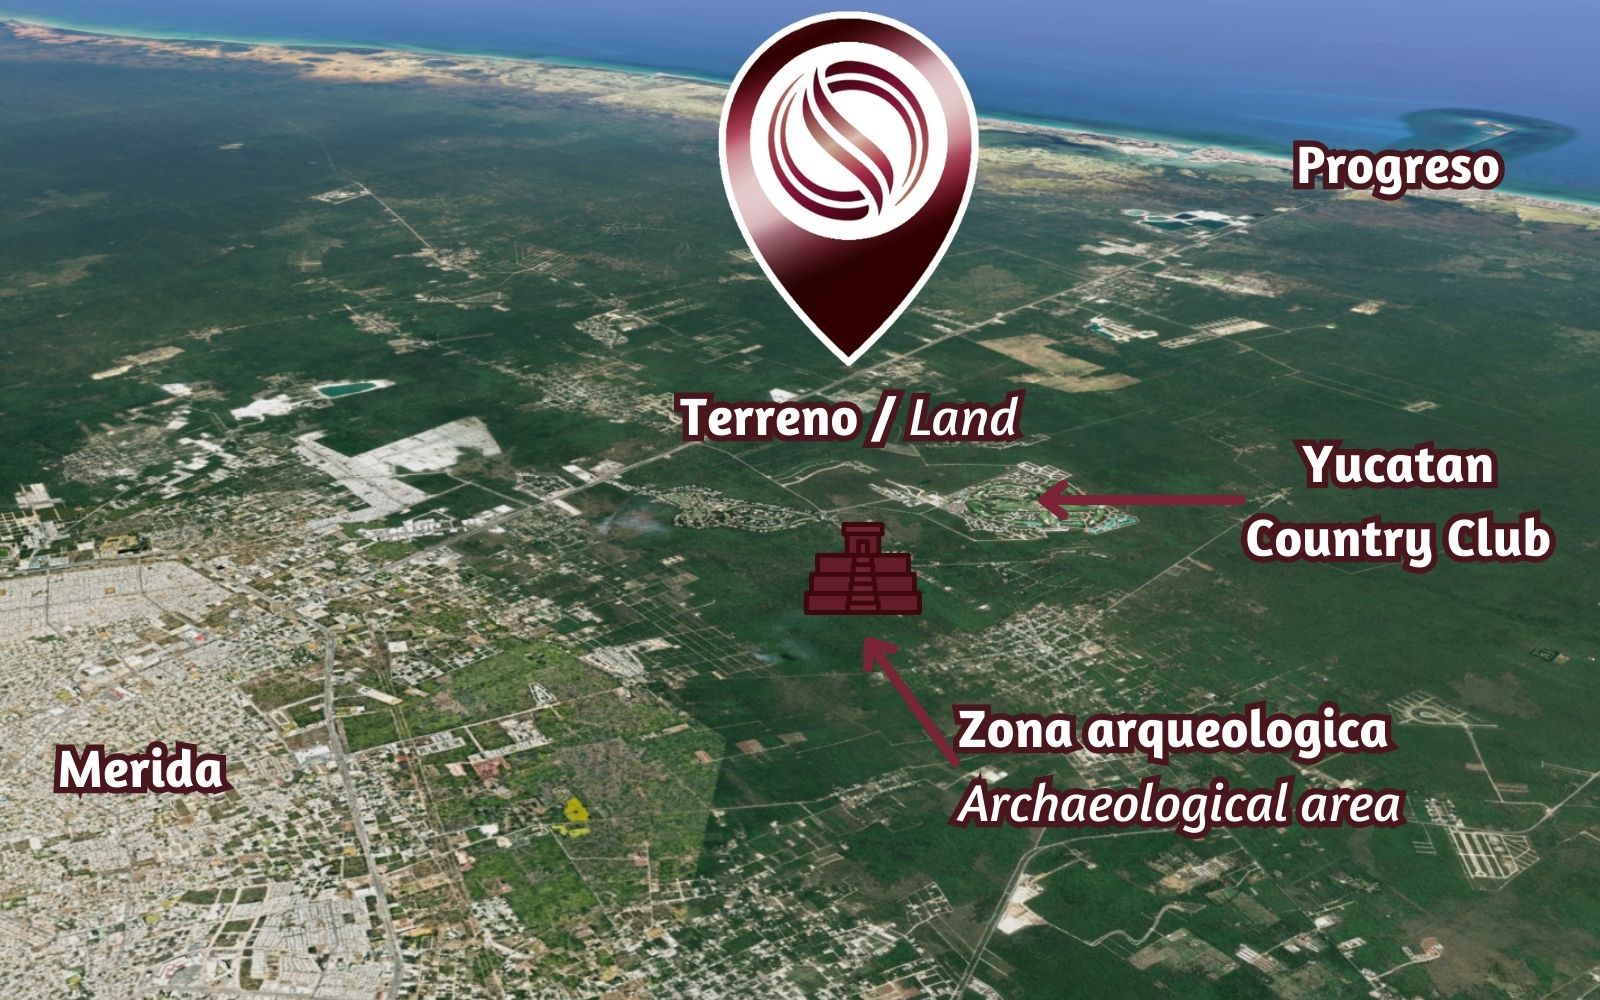 1,301 m2 land with clubhouses, pet-park, gardens and more. For sale Merida.